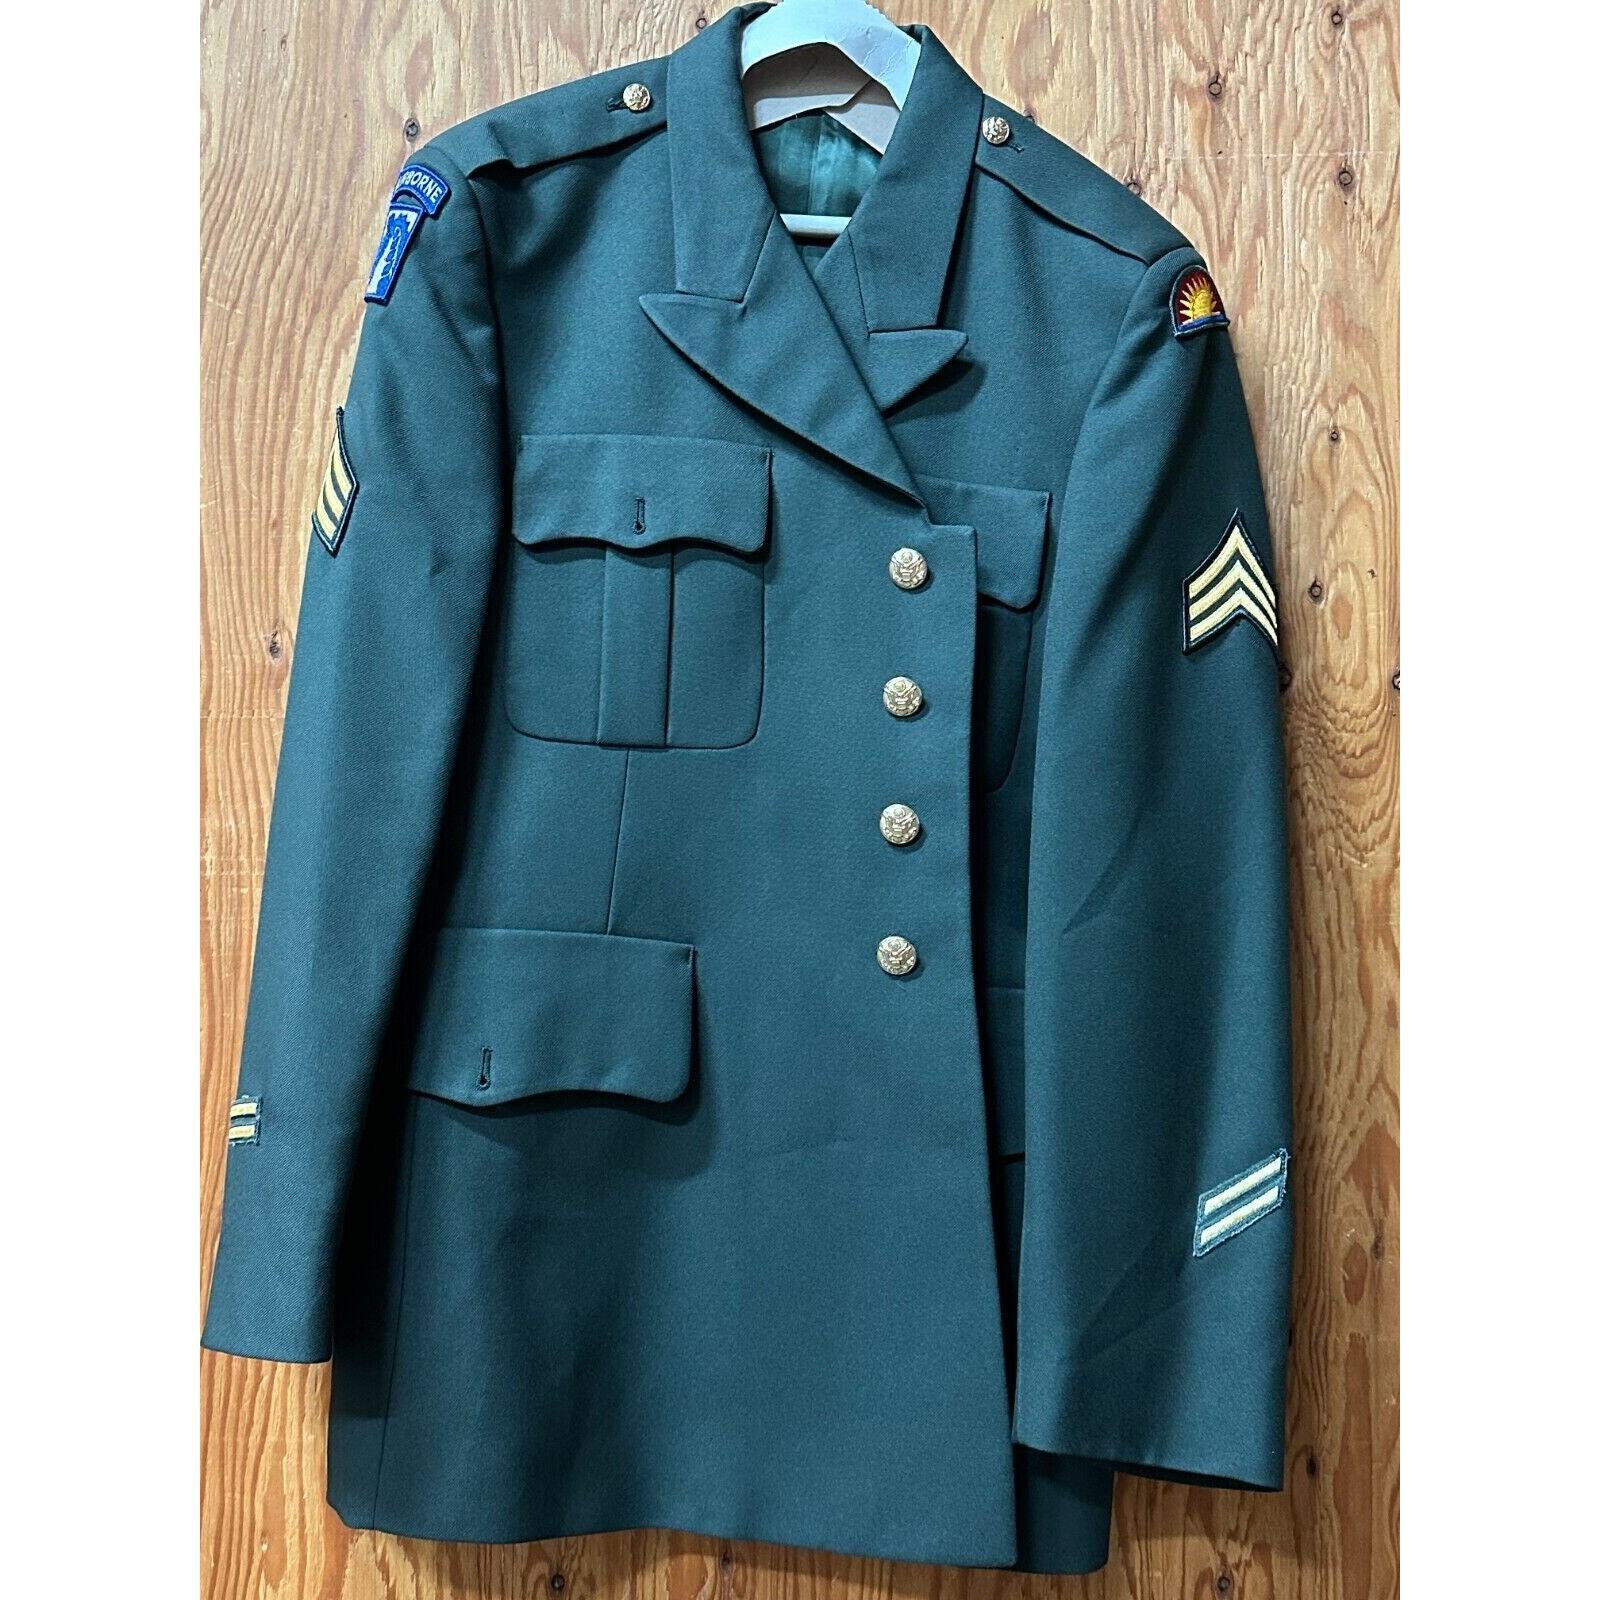 US Military Airborne Dress Coat Insigna Large (estimated) Dry-cleaned